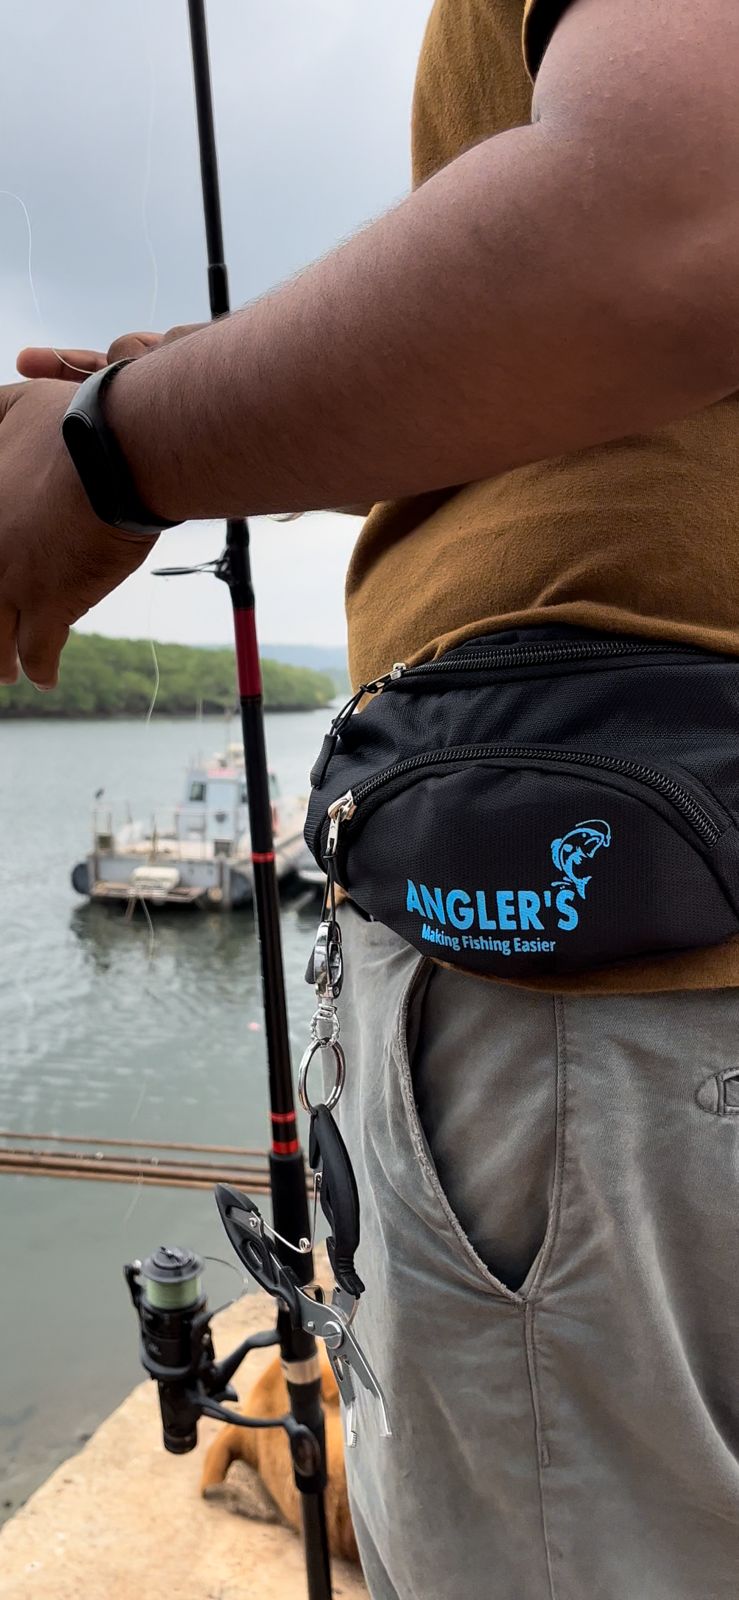 Angler's Waist Pouch for Lures and Bait Storage